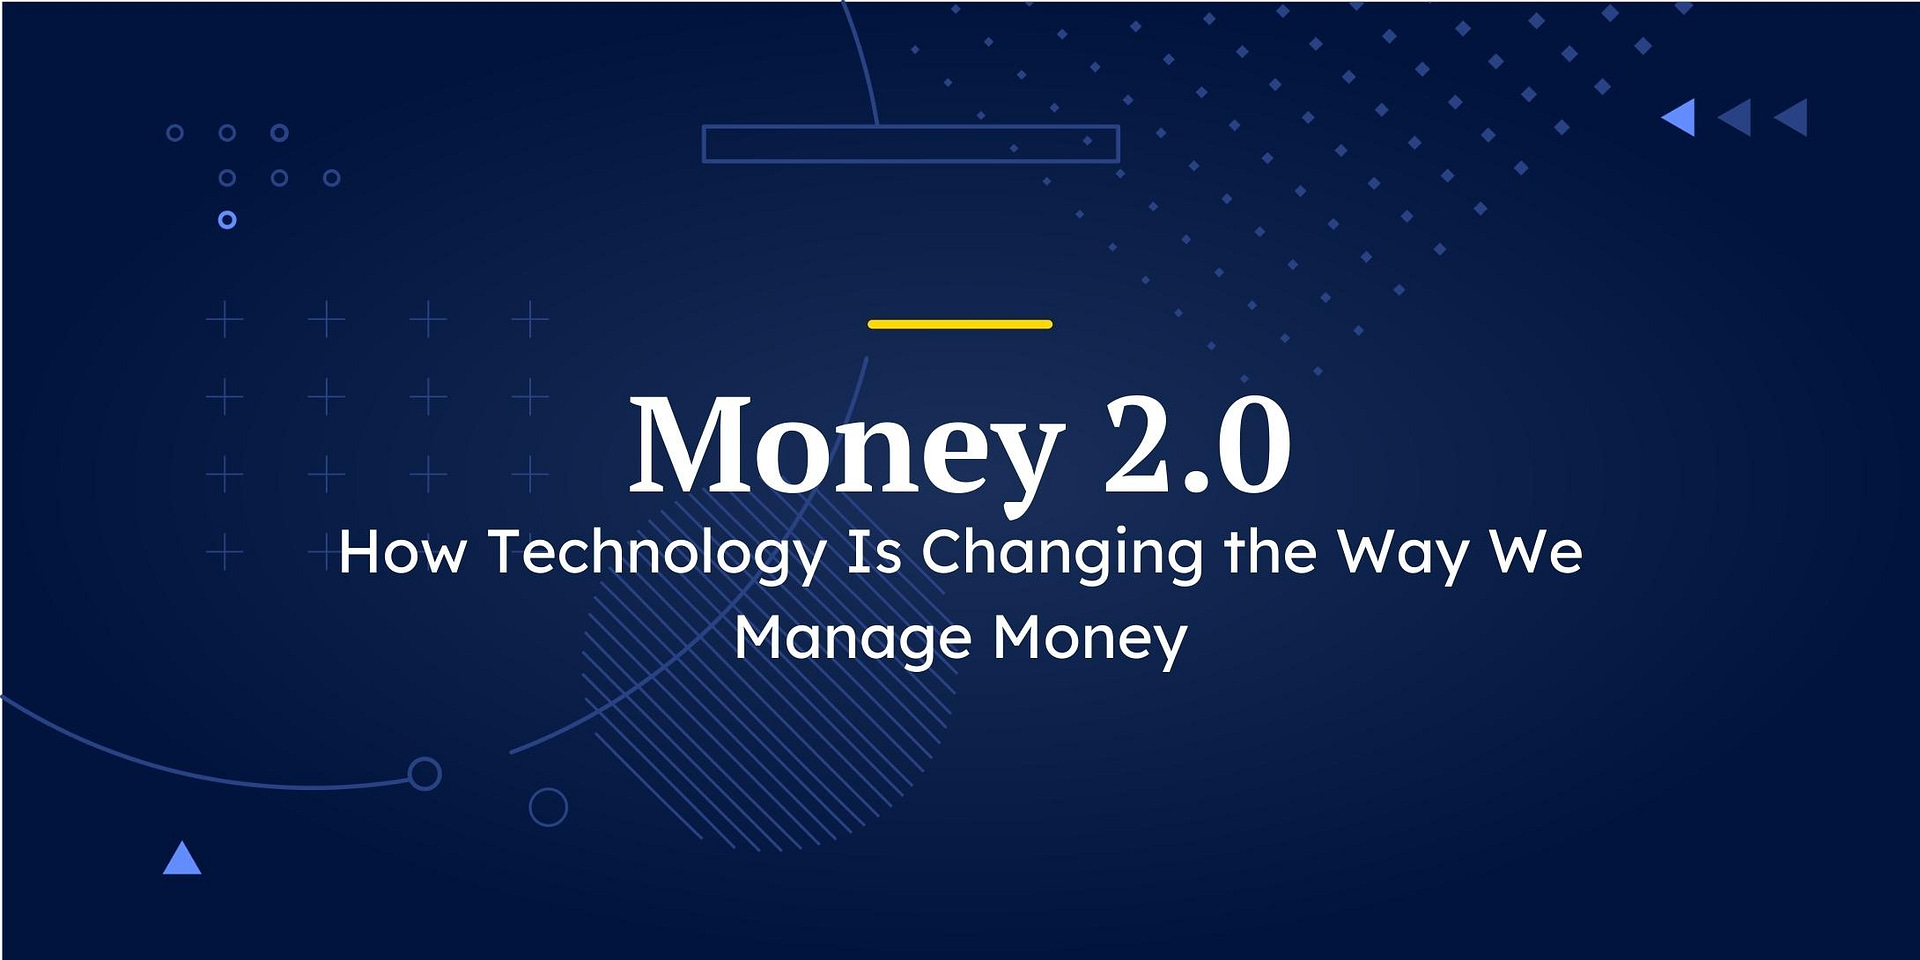 Money 2.0: How Technology Is Changing the Way We Manage Money